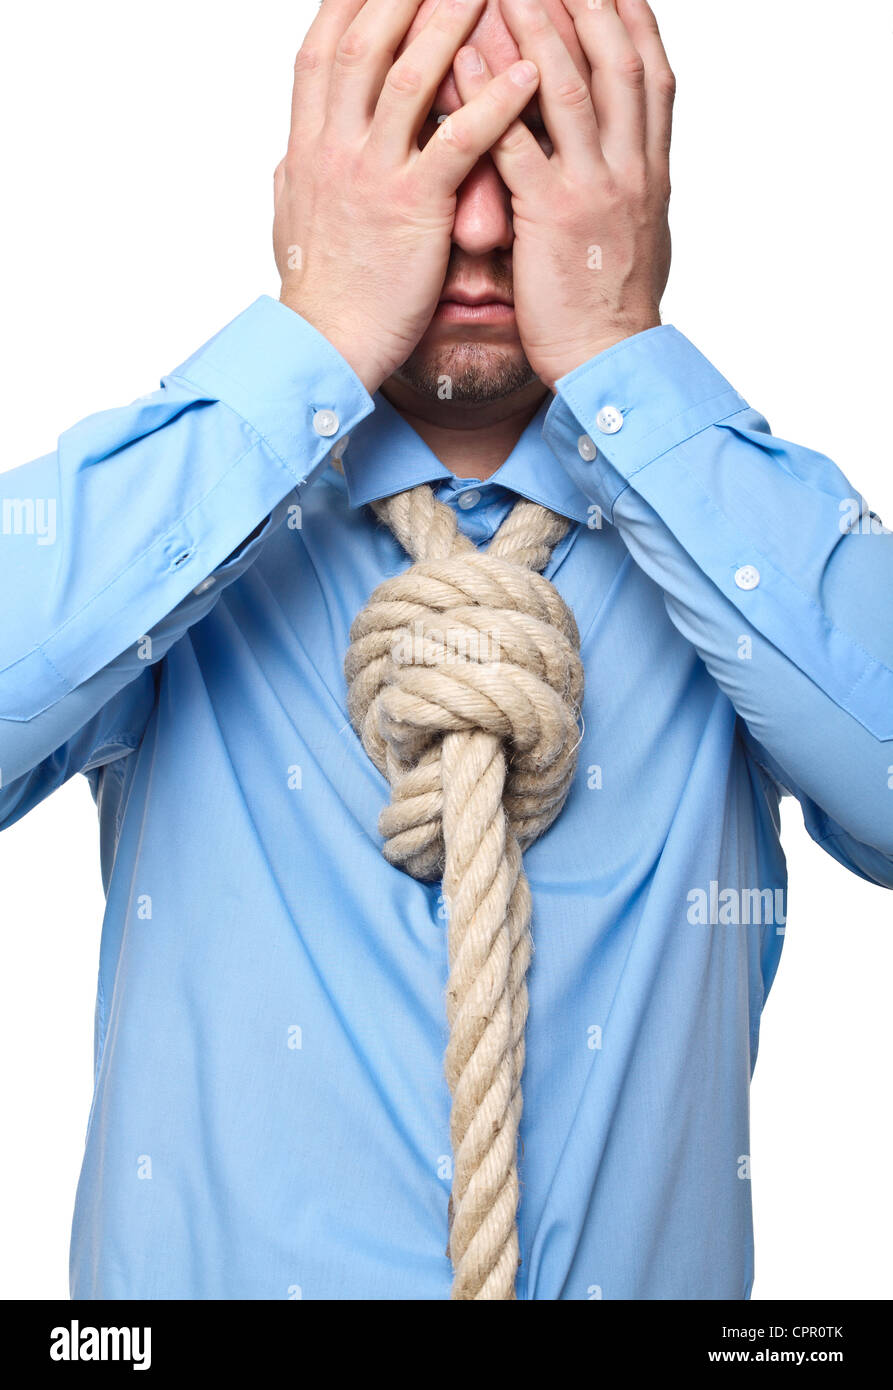 sad man with loop tie isolated on white background Stock Photo